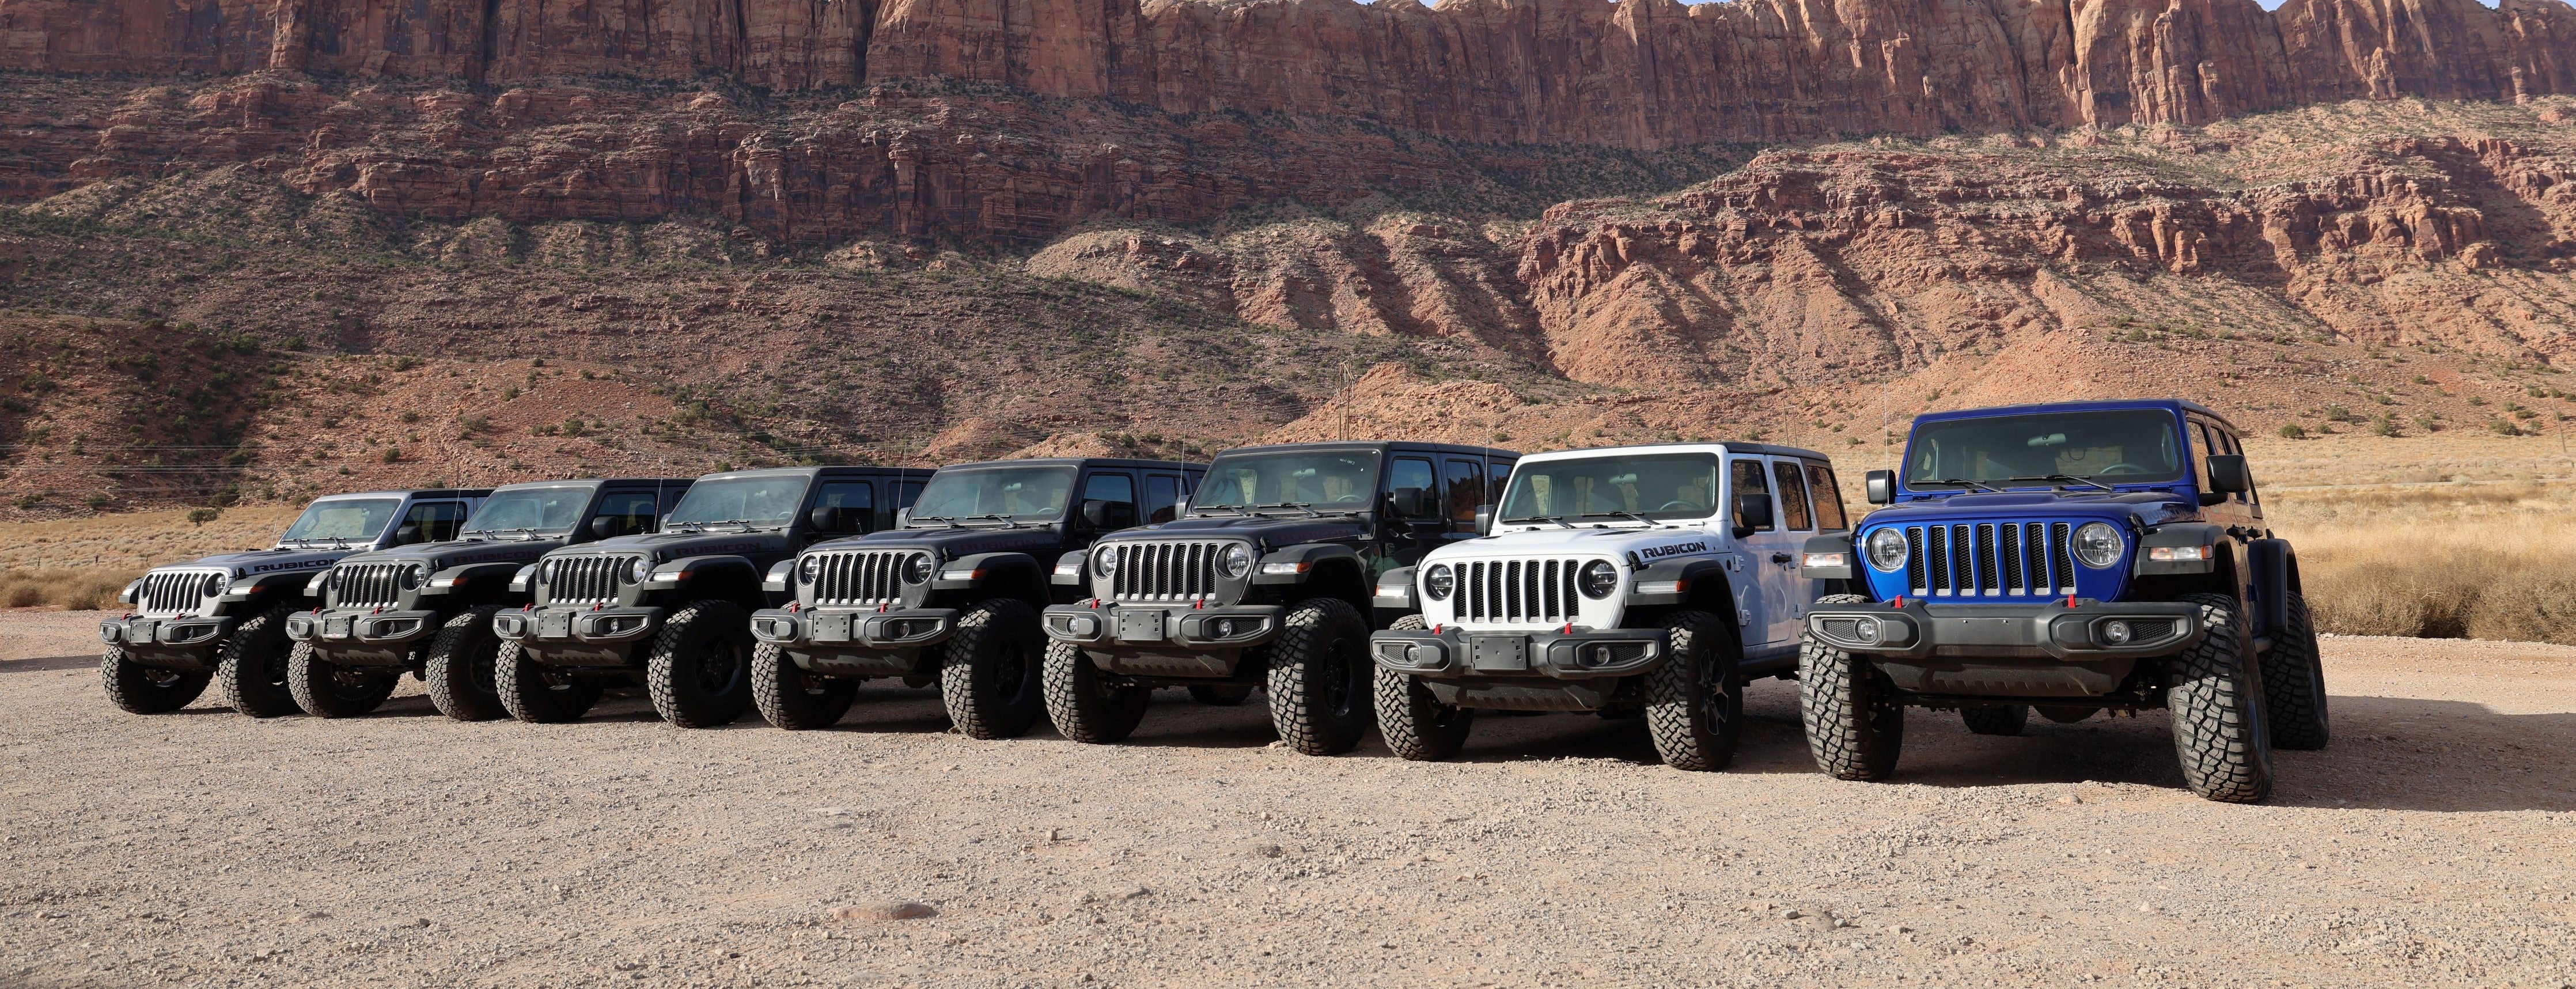 The Ultimate Jeep Wrangler Lift Kit Comparison – On & Off-Road Test